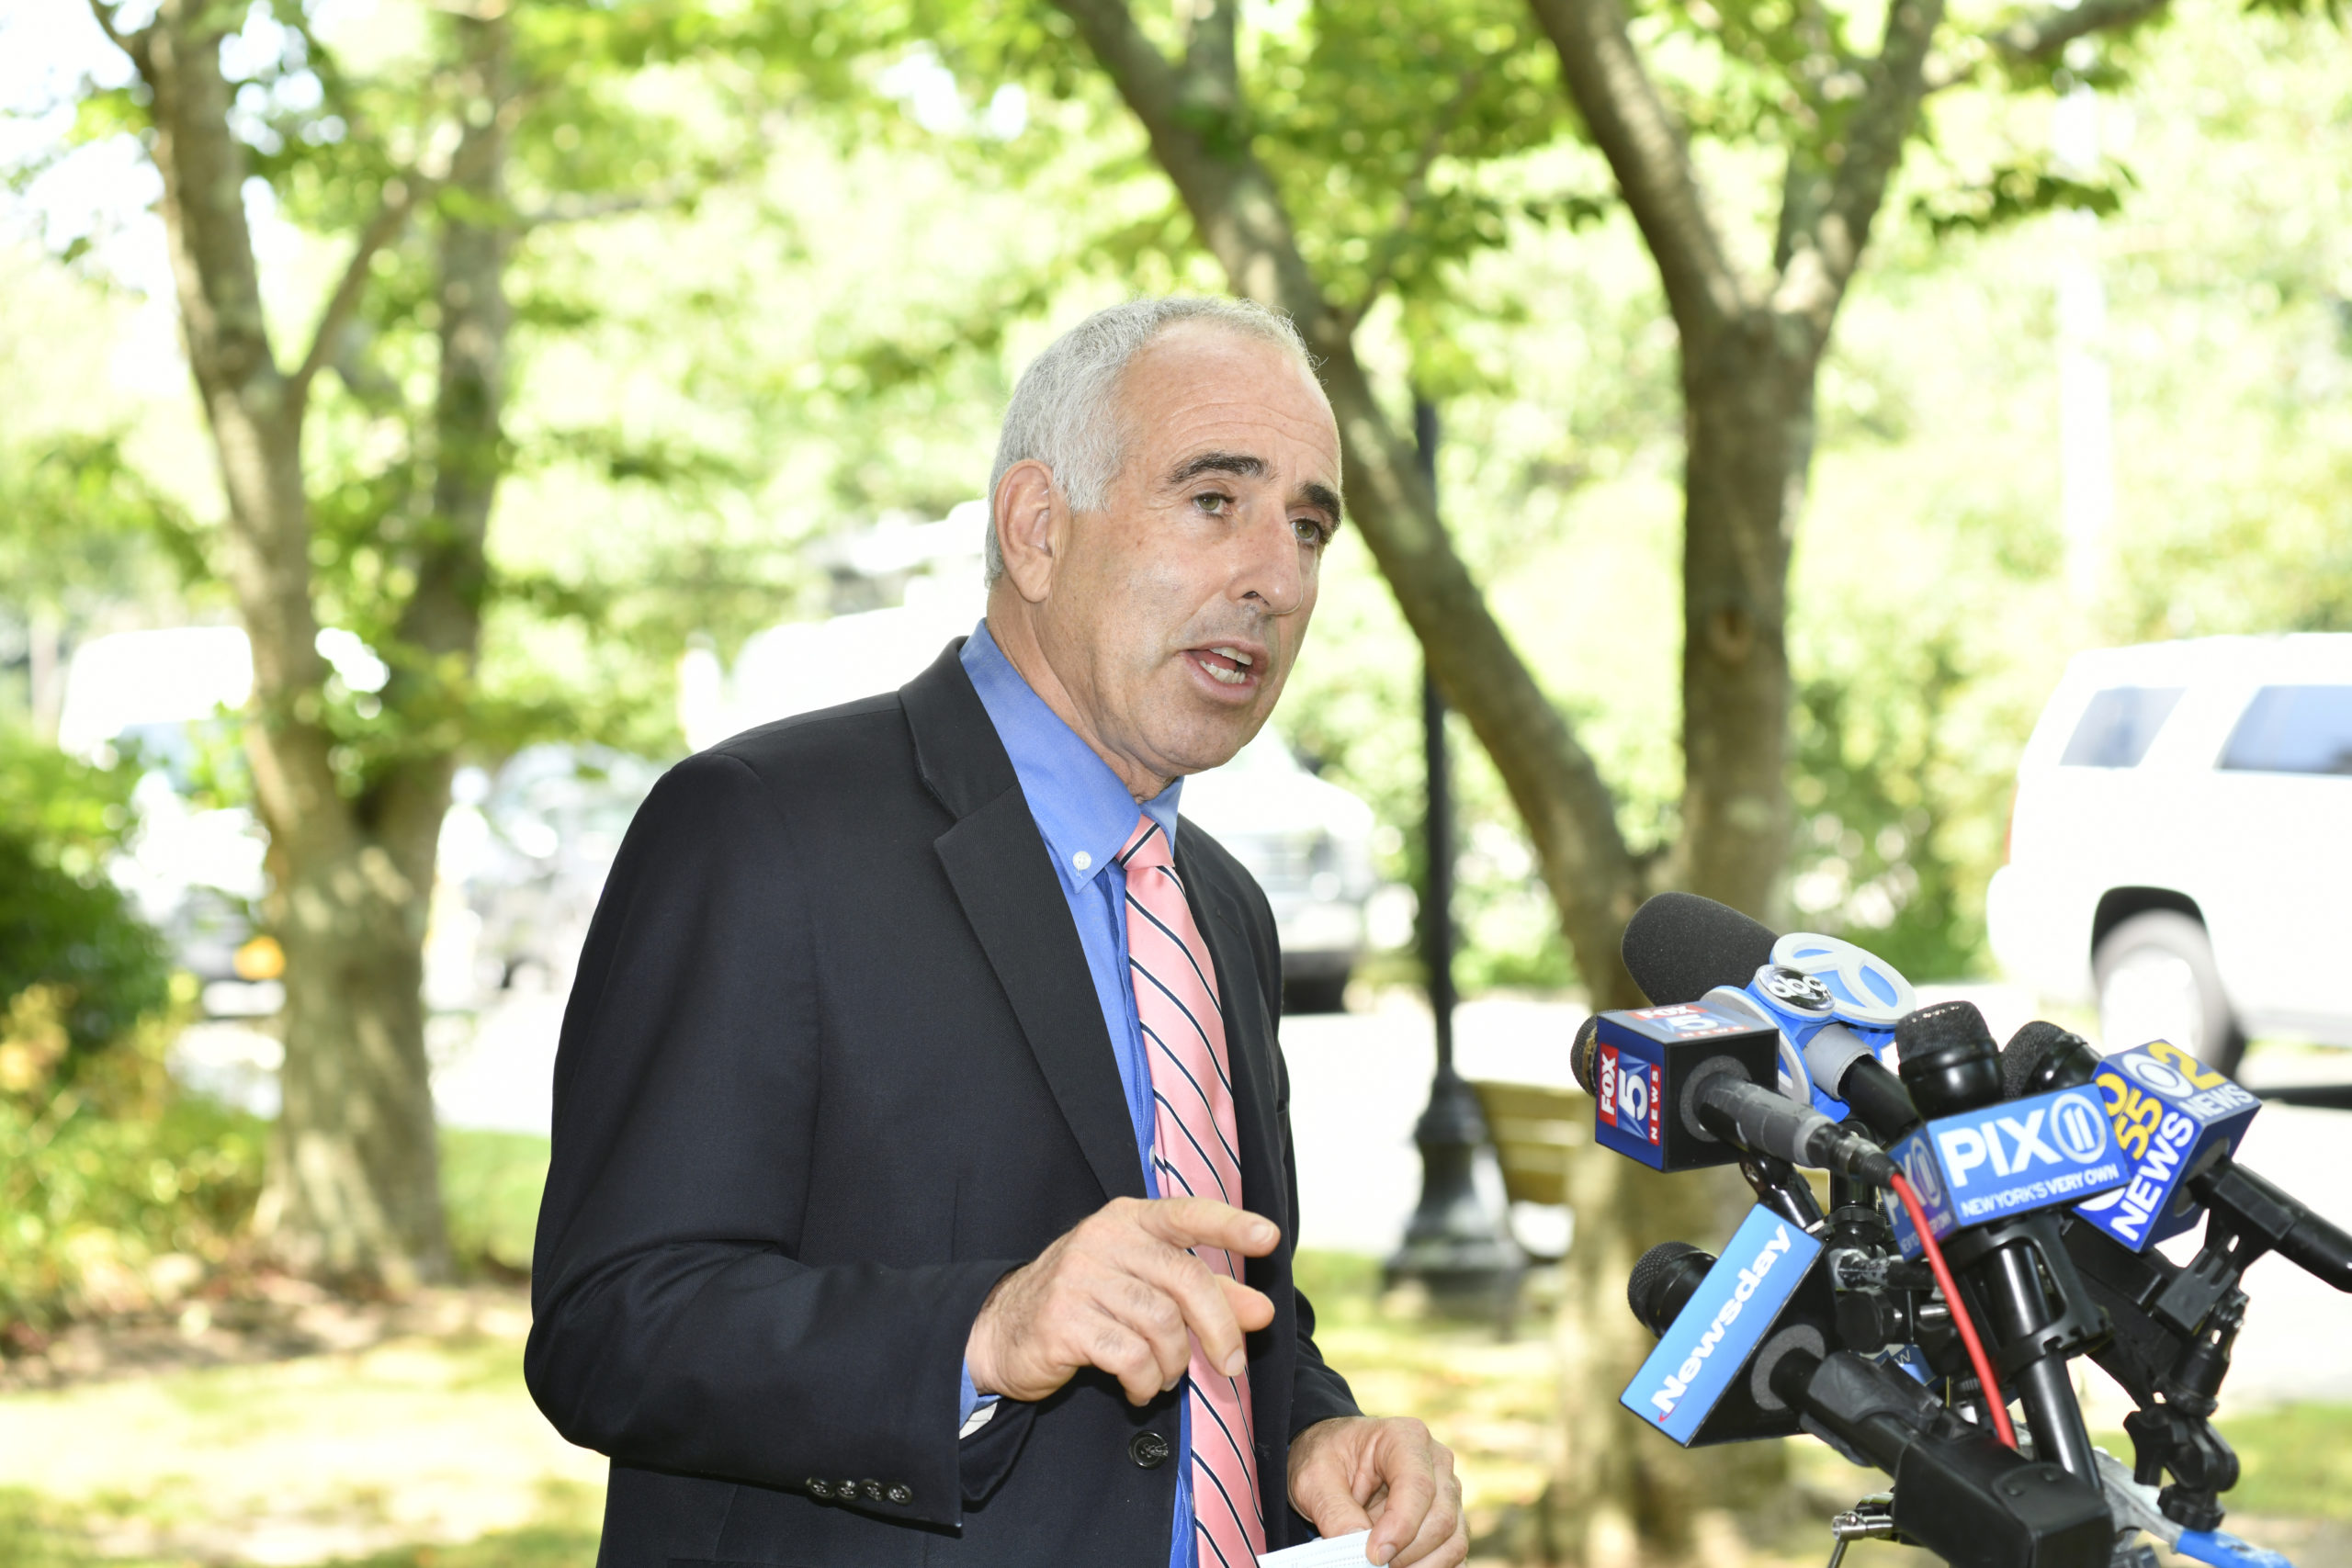 Southampton Town Supervisor Jay Schneiderman holds a press conference outside of town hall on Tuesday afternoon regarding the concert in Water Mill on Saturday night.   DANA SHAW